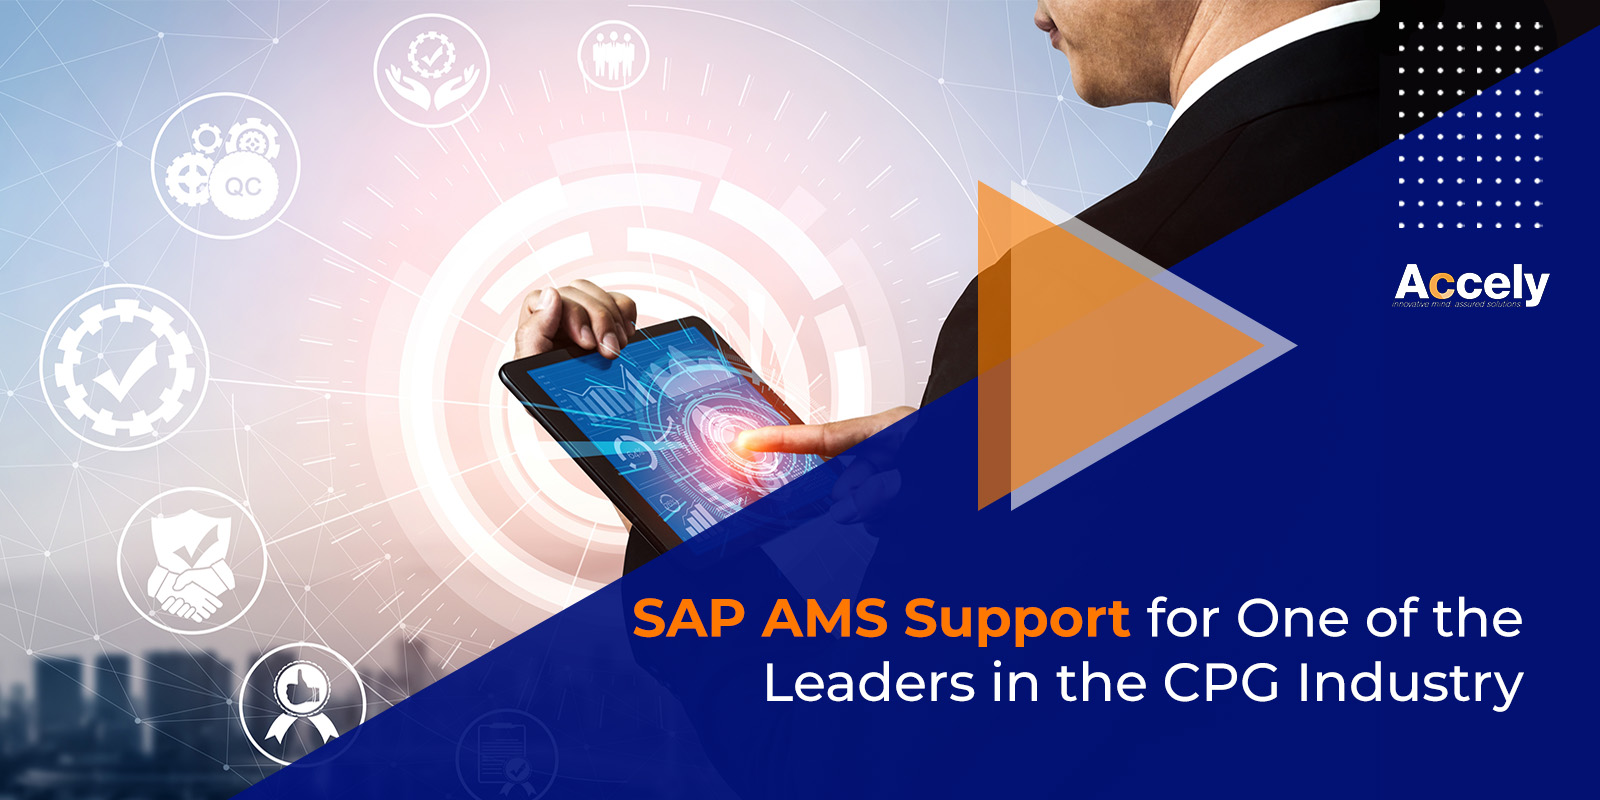 SAP AMS Support For One Of The Leaders In The CPG Industry